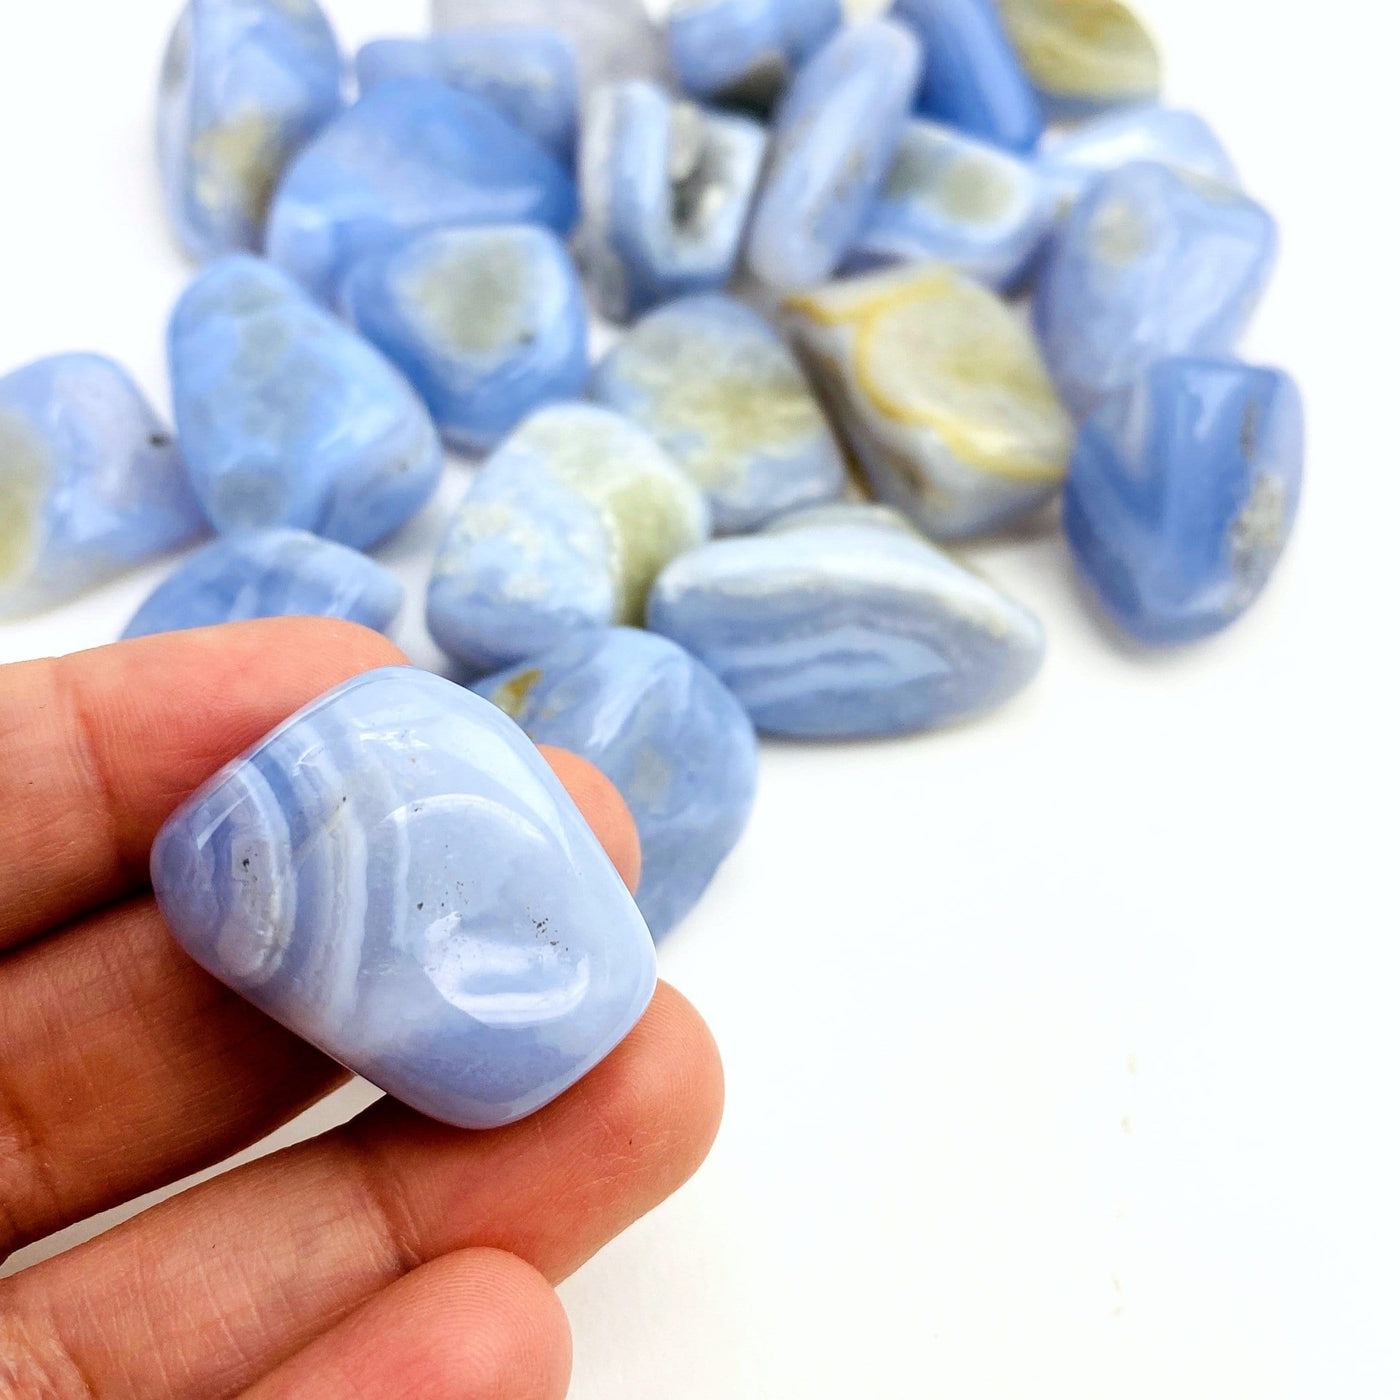 Blue Lace Agate Medium Tumbled Stones with 1 in a hand for size reference